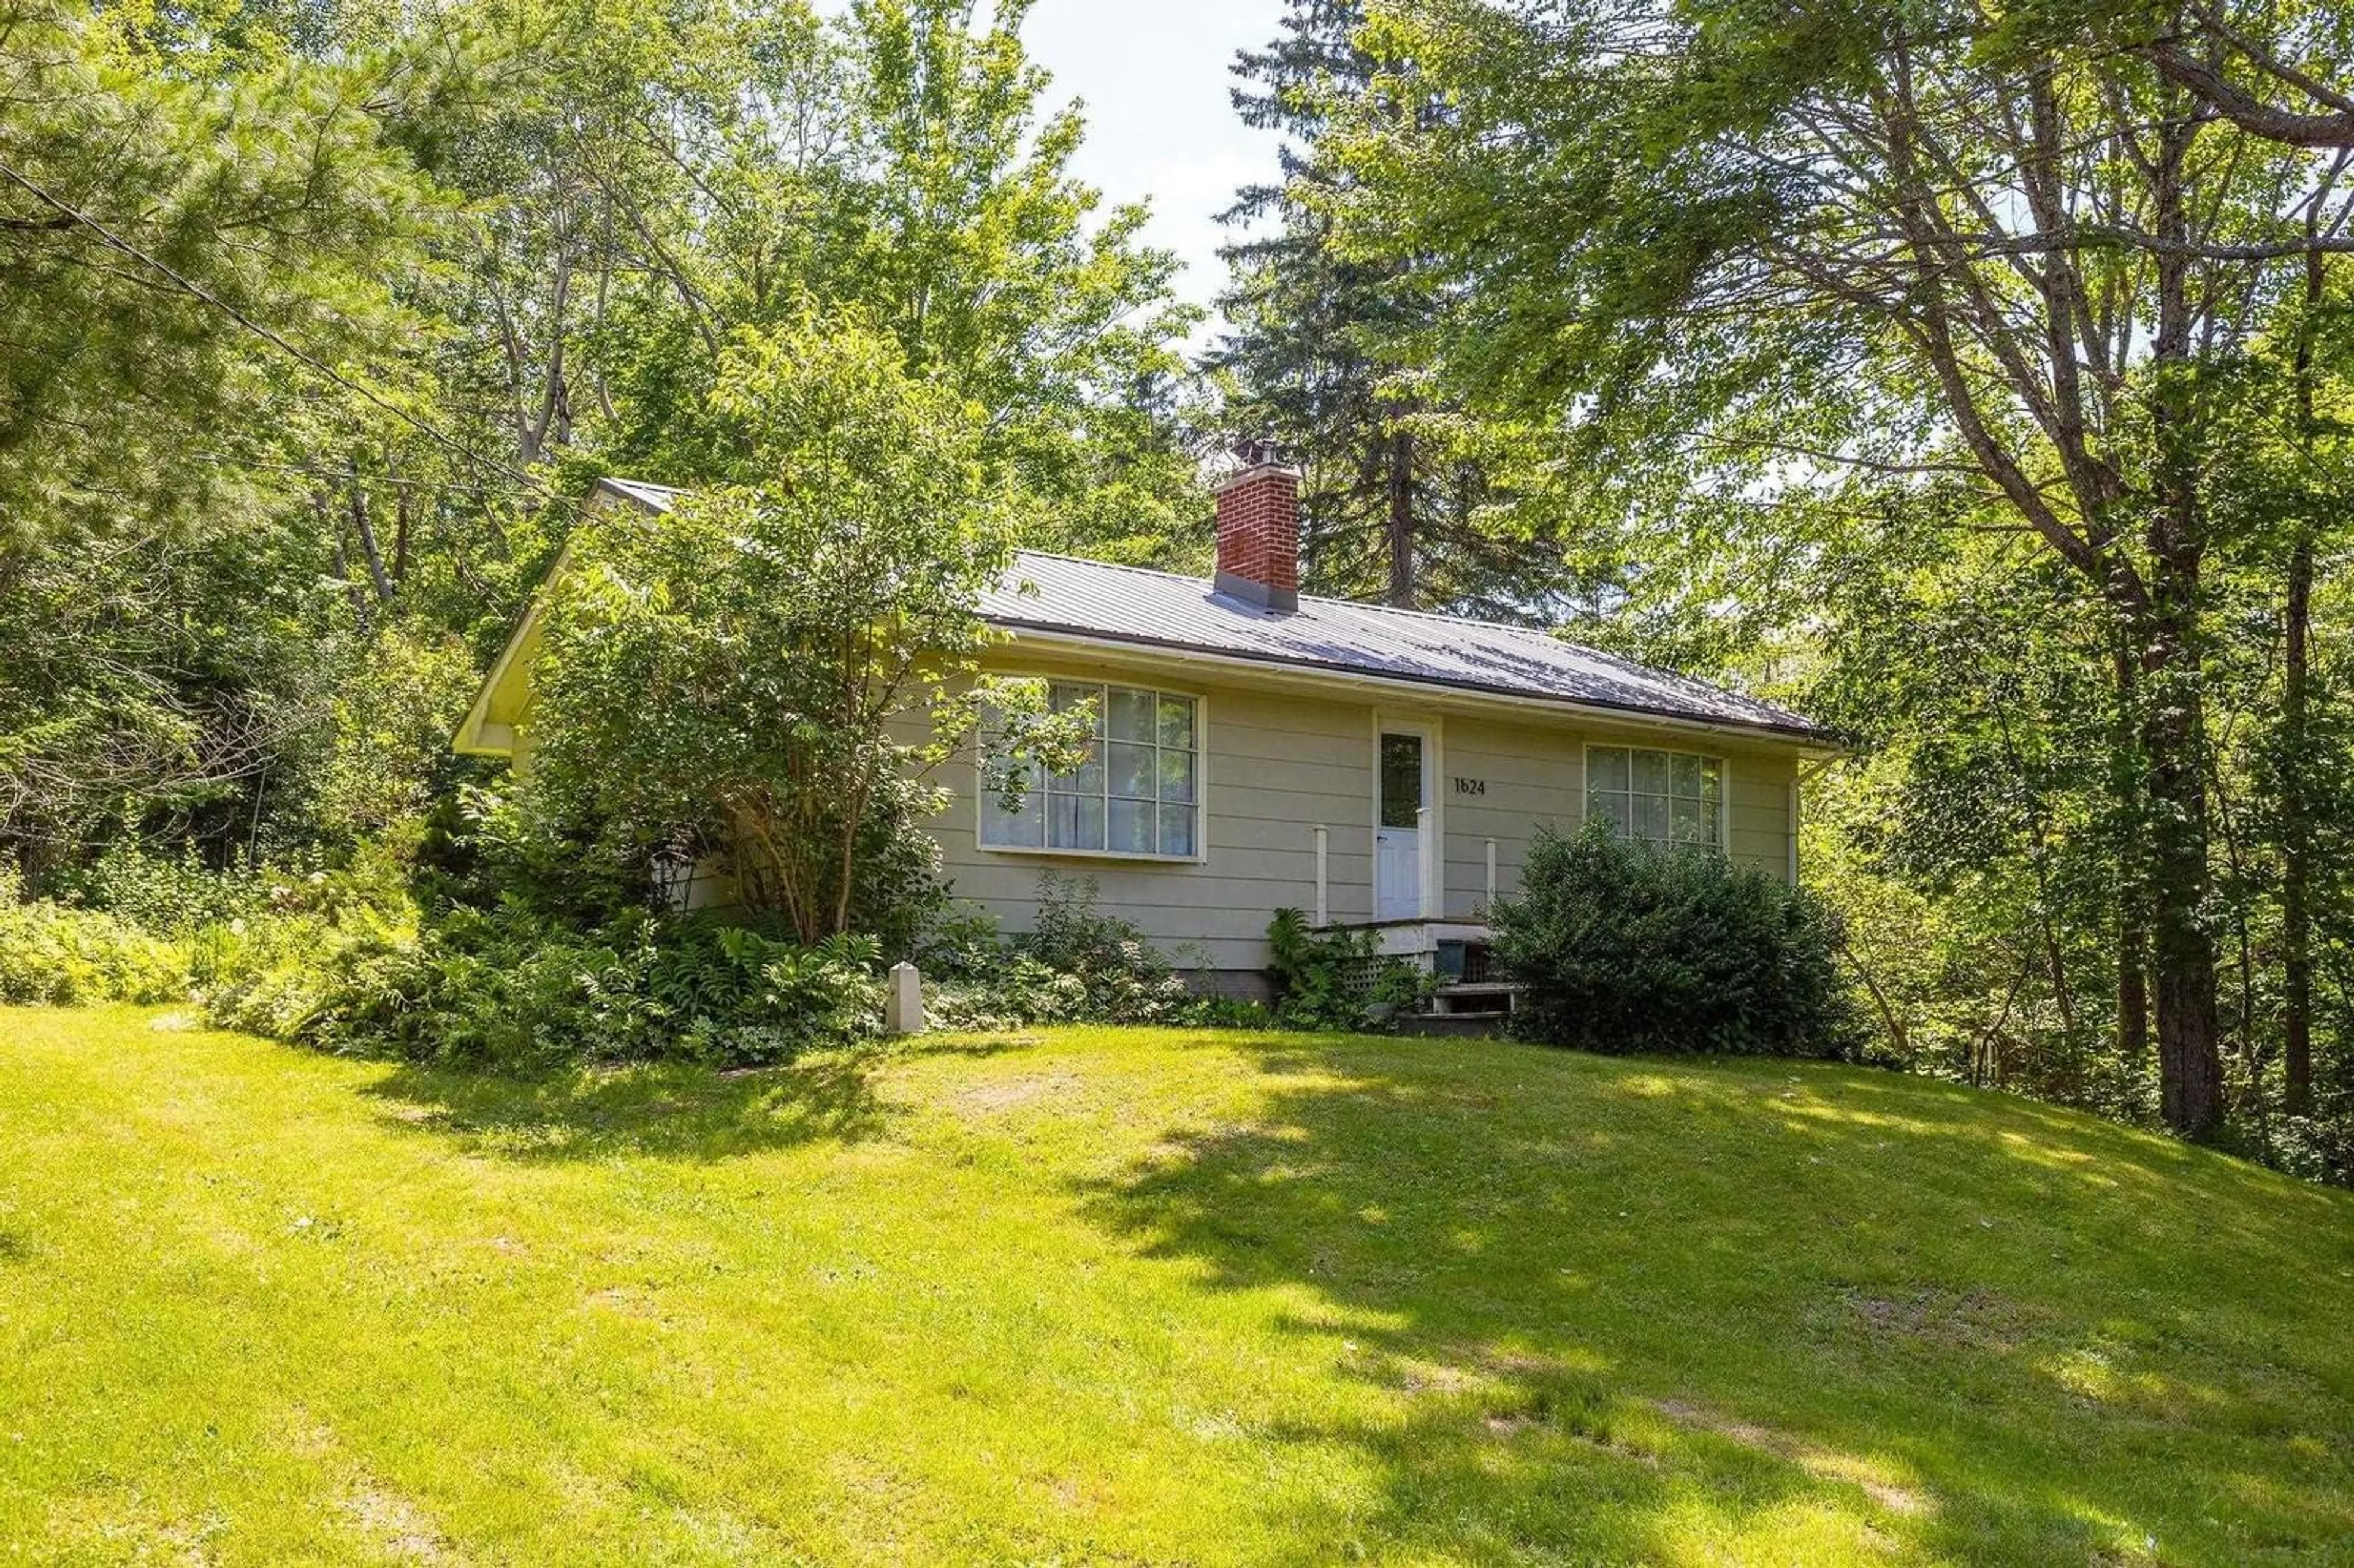 Cottage for 1624 Valley Rd, Wentworth Nova Scotia B0M 1Z0